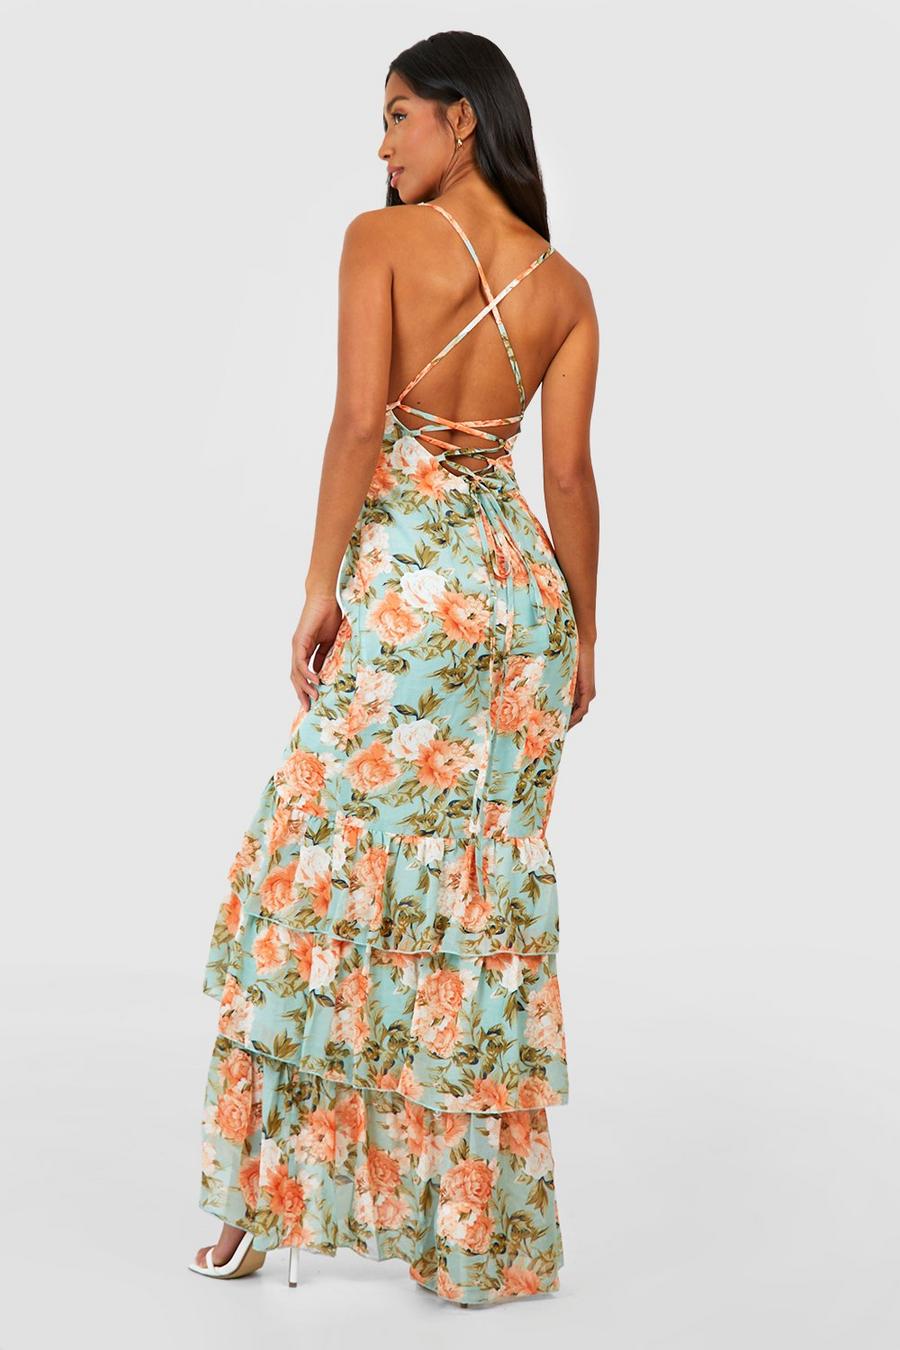 Sage Petite Floral Tiered Ruffle Fitted Maxi Dress